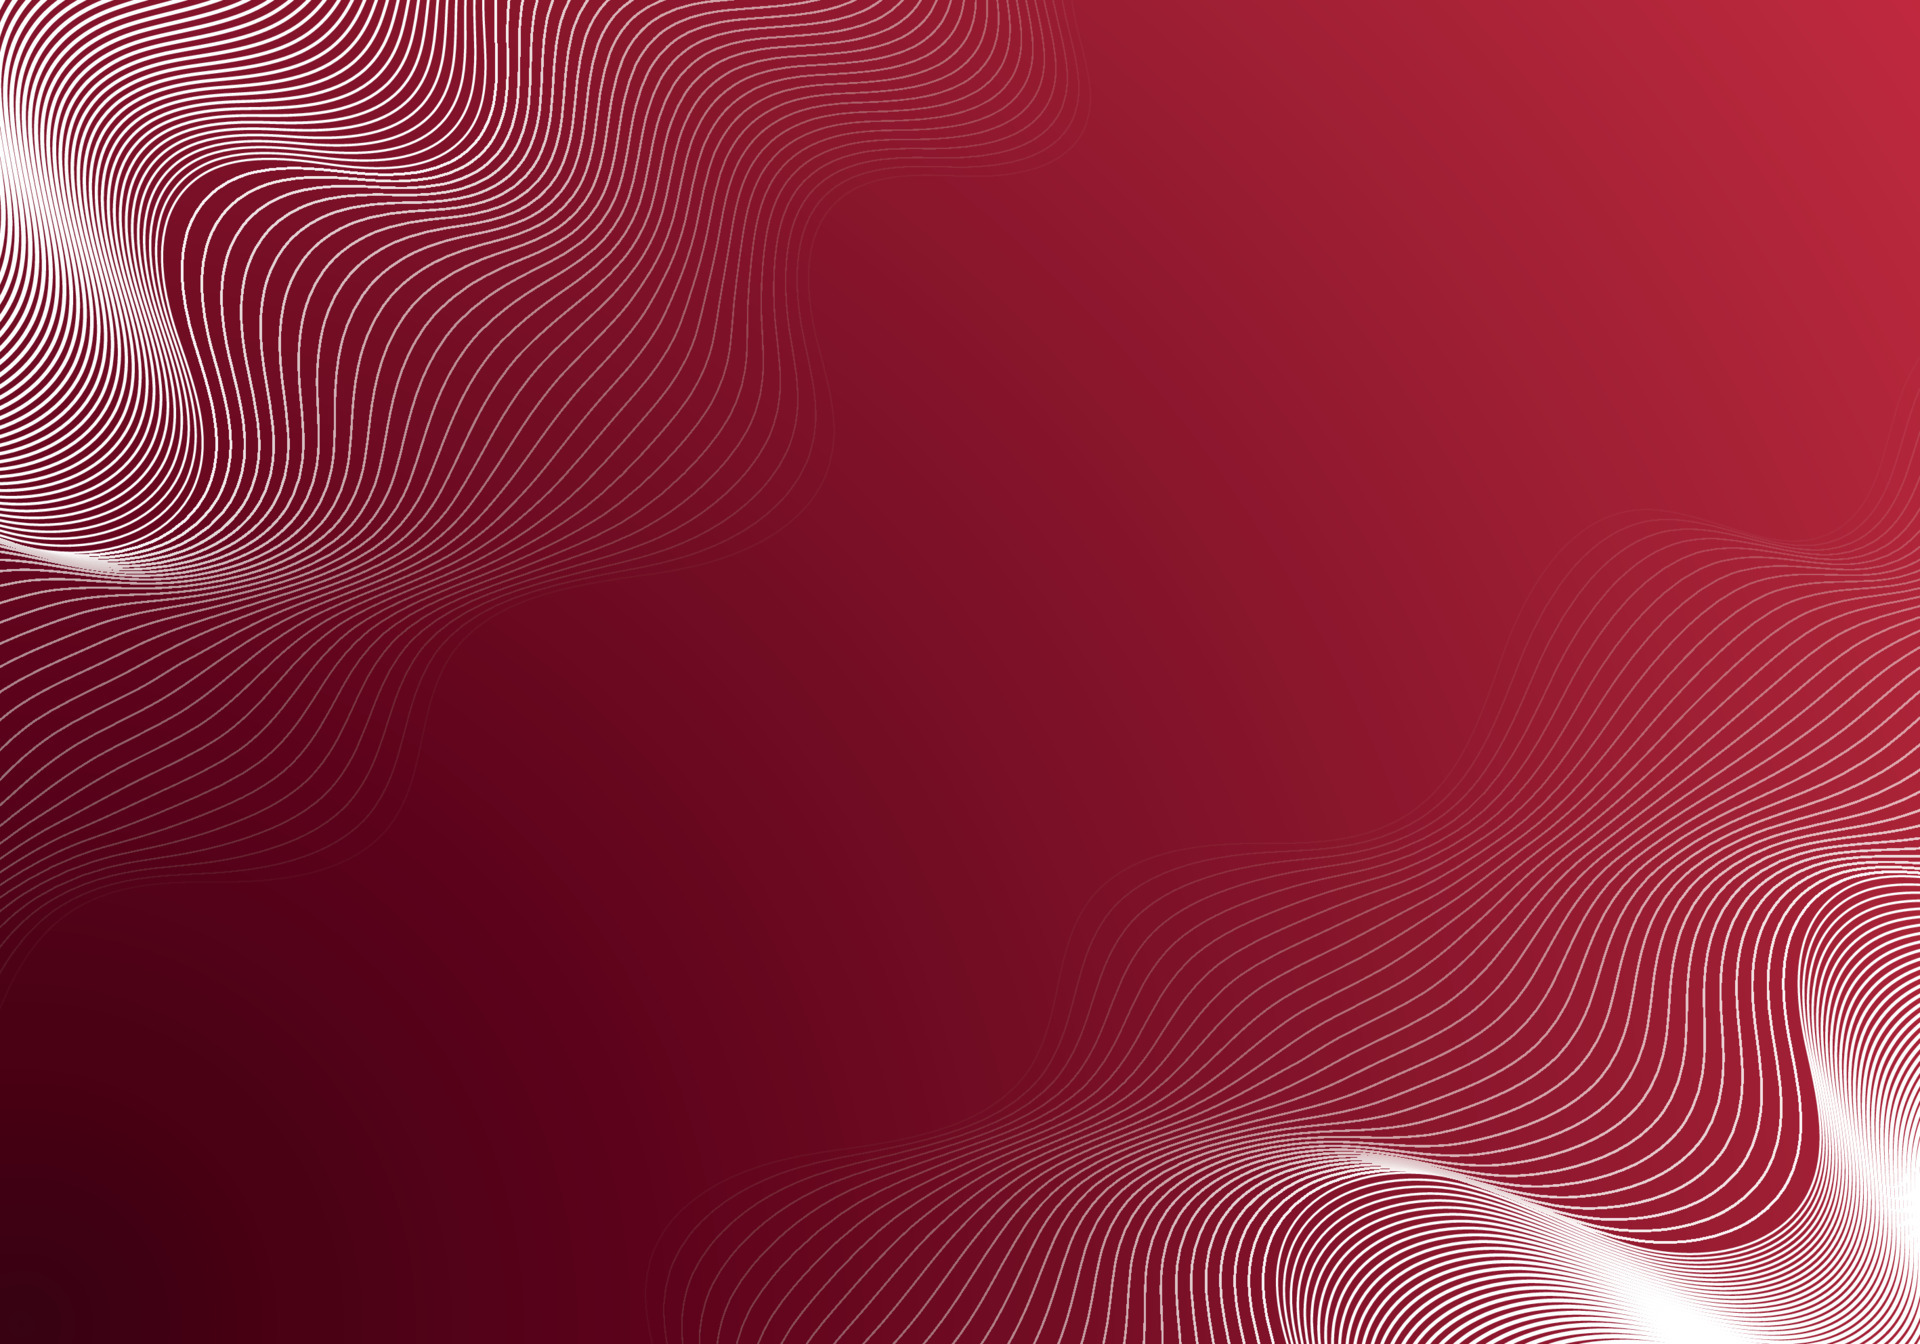 Premium background design with diagonal line pattern in maroon